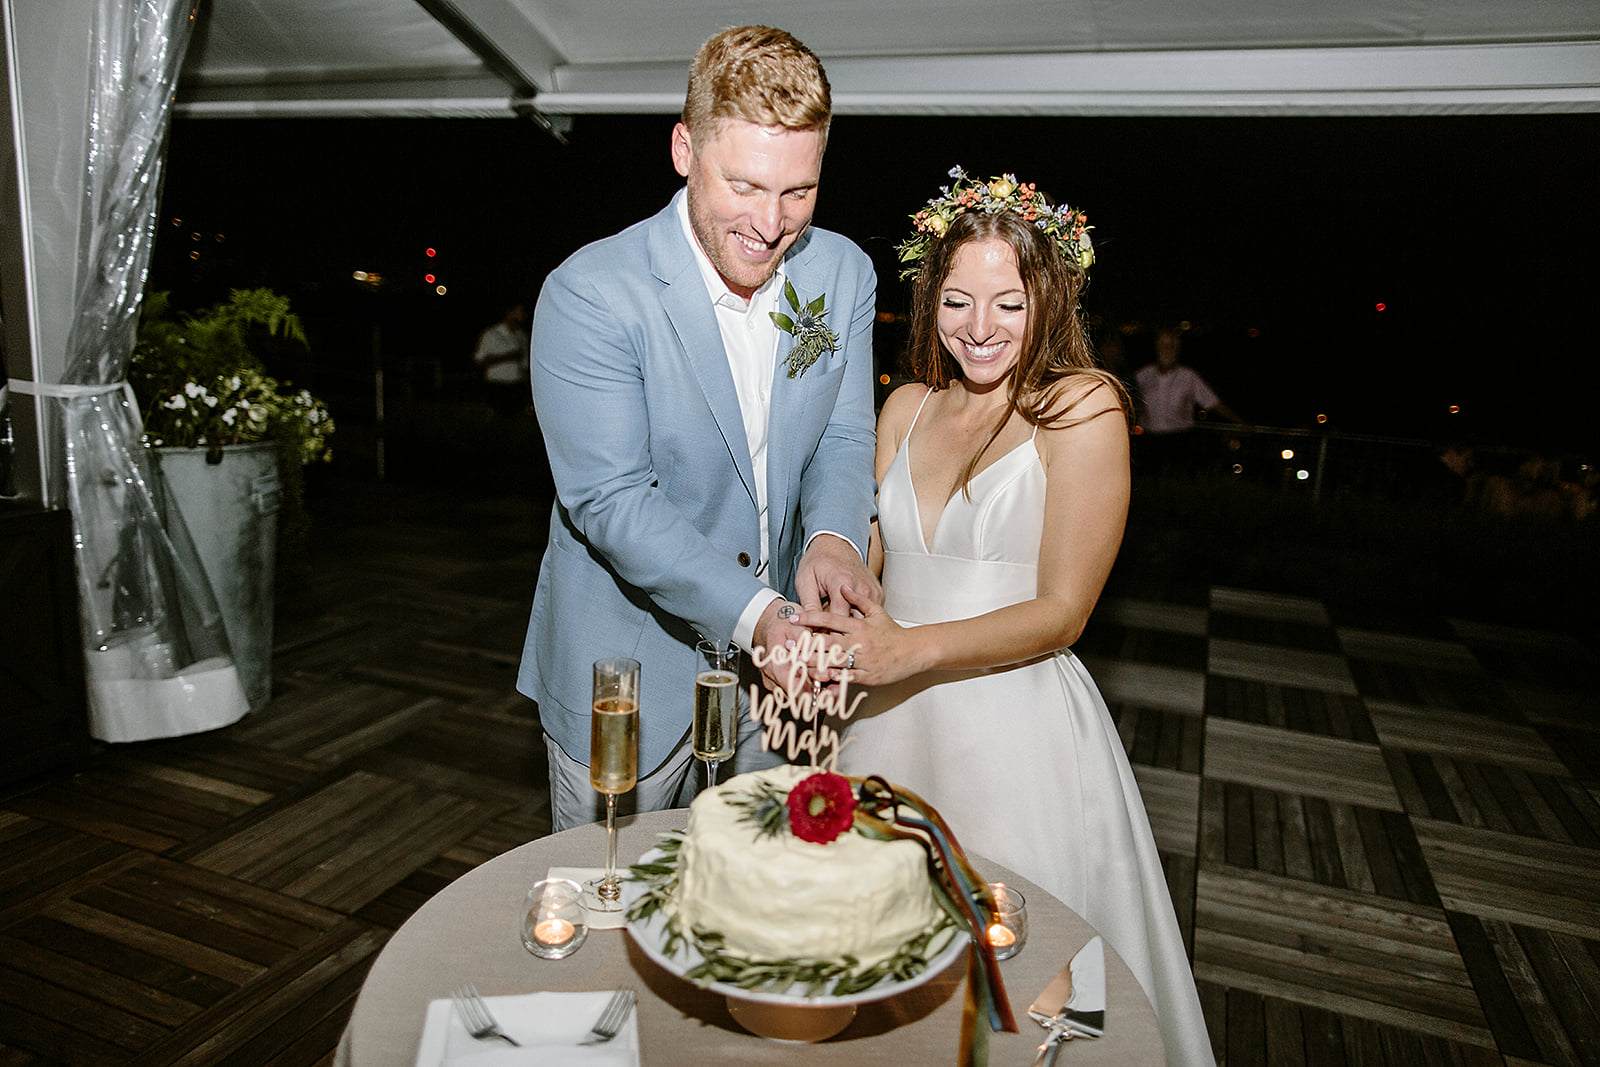 AN ICONIC ROOFTOP WEDDING